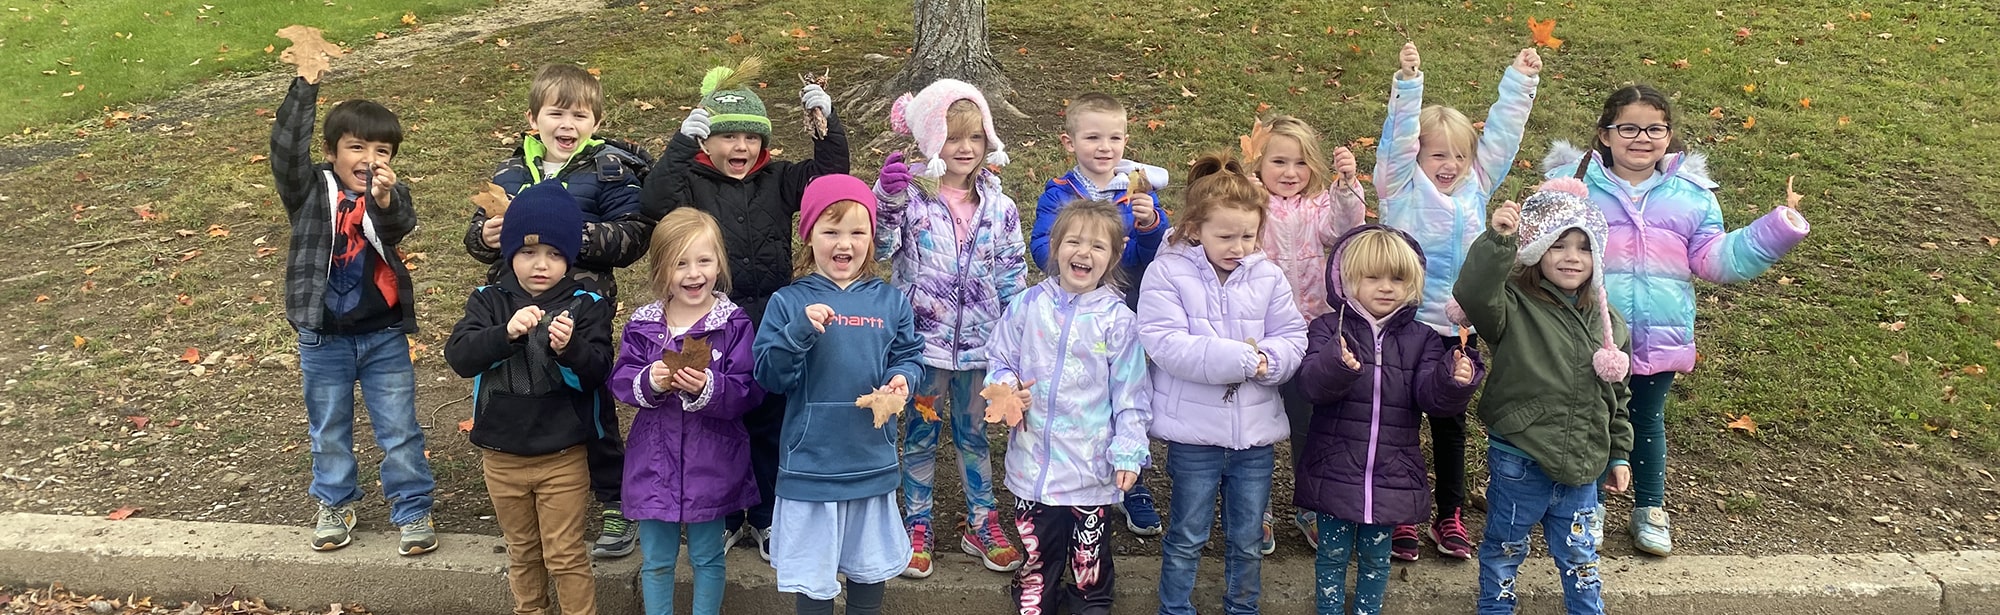 Group of happy preschool students outside holding up leaves